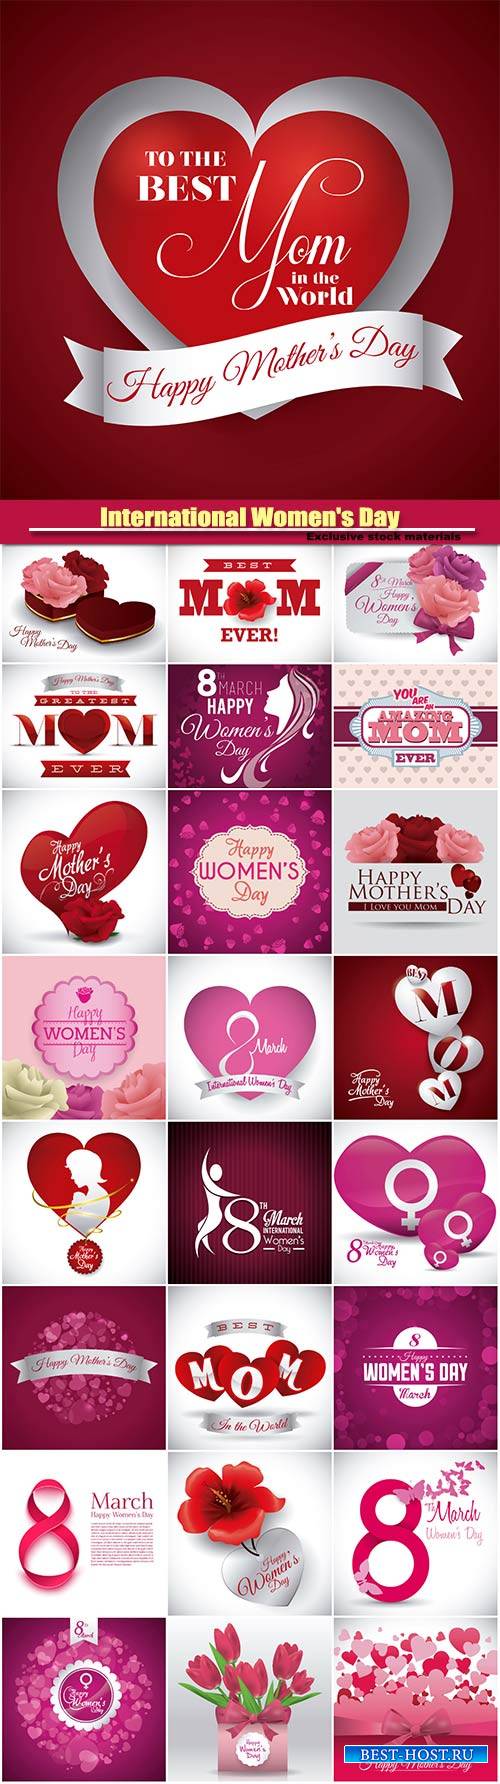 International Women's Day, 8 March backgrounds vector